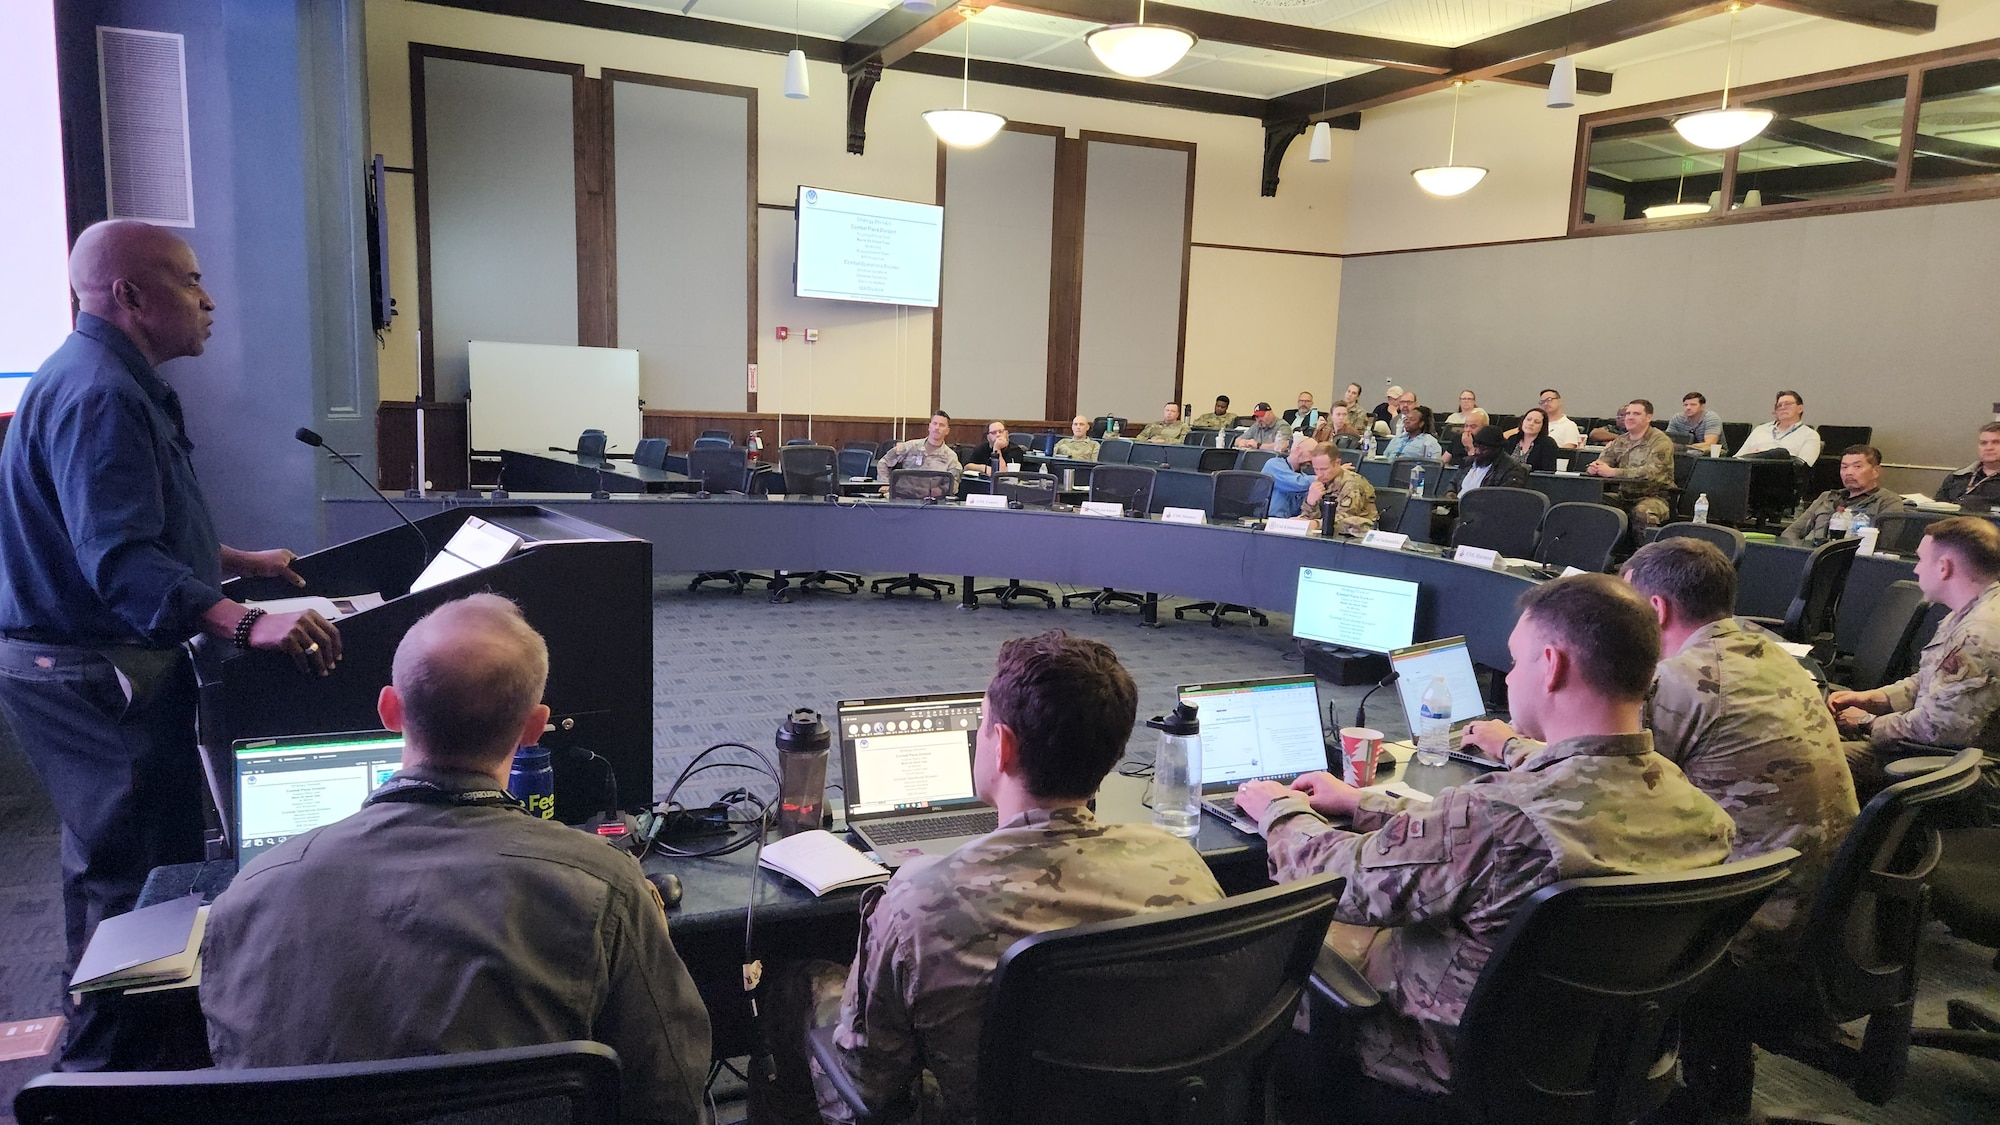 photo of large conference room with slide on wall, military members sitting at tables with computers